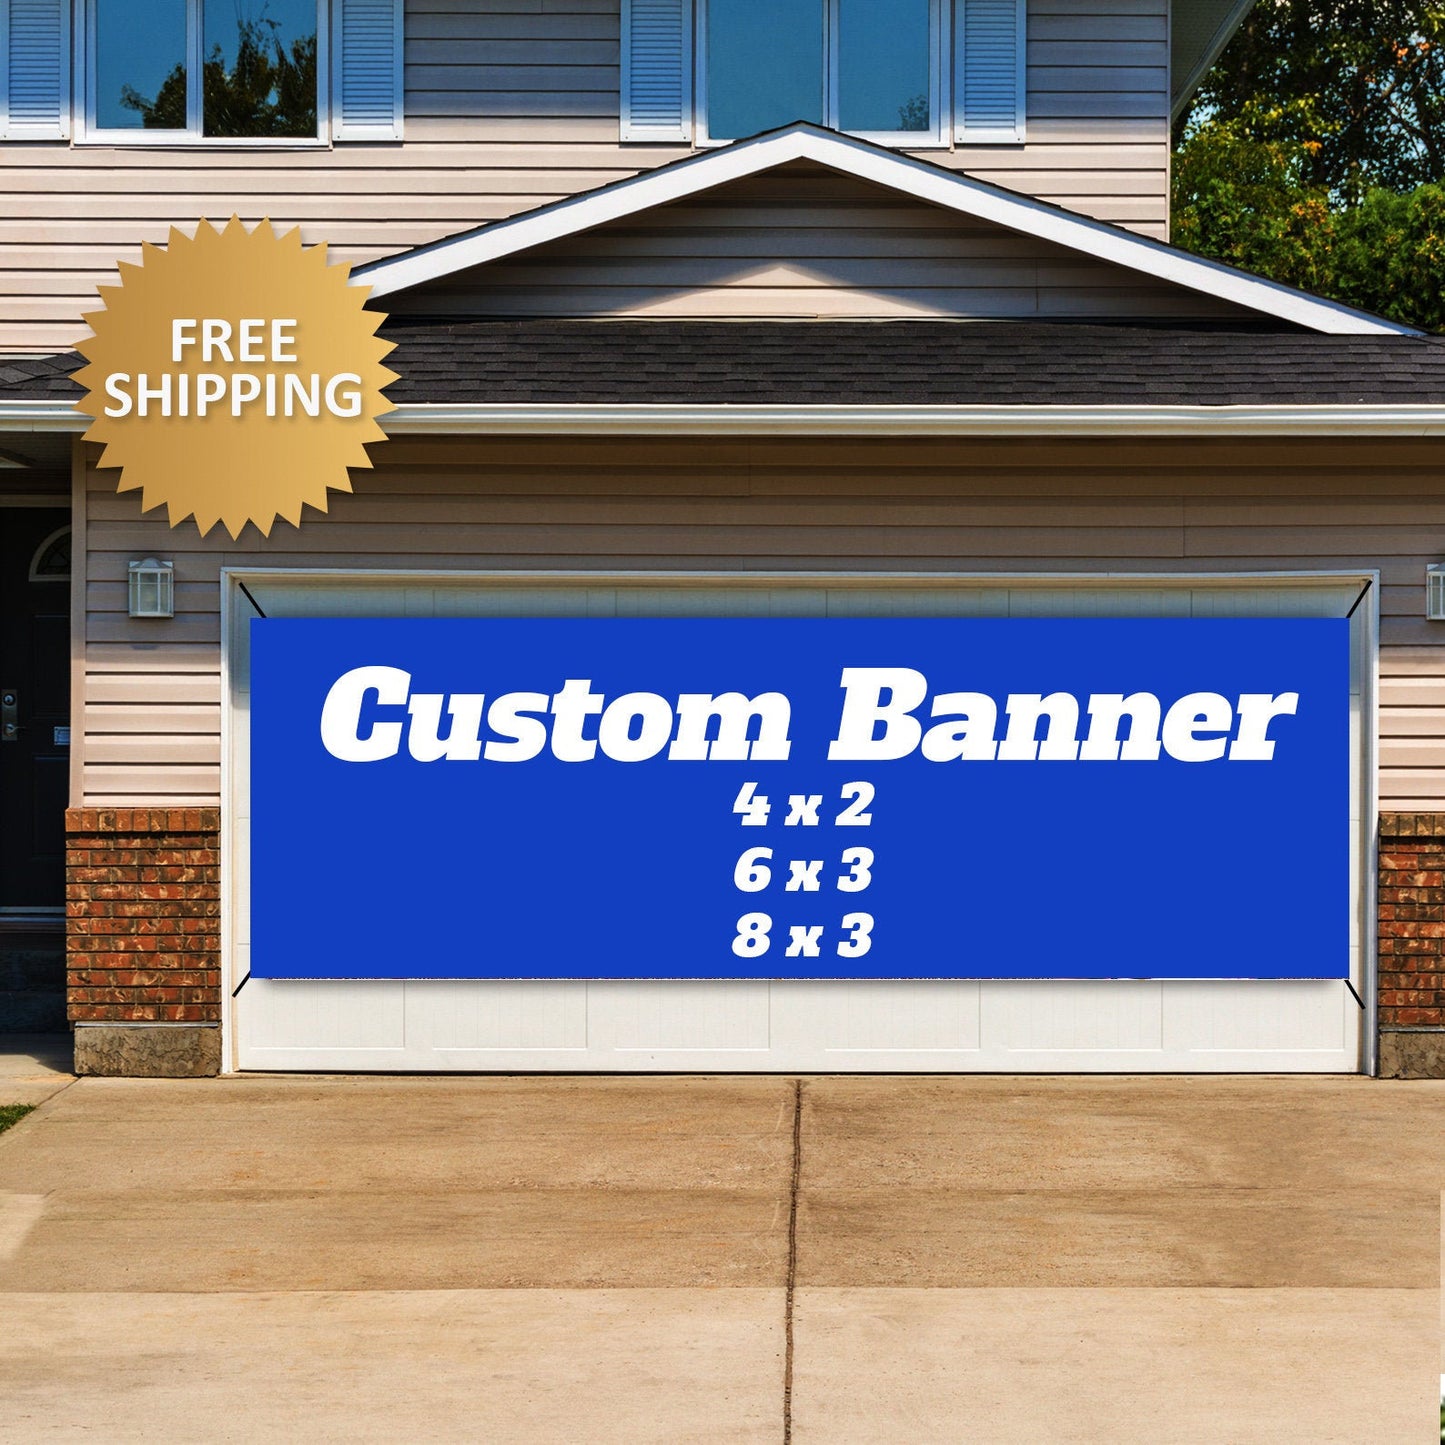 Custom Banner, Printed Custom Banner, Drive by Birthday banner, Custom Personalized Party Banners, Graduation Banner, 8x3 banner, 8x3 custom